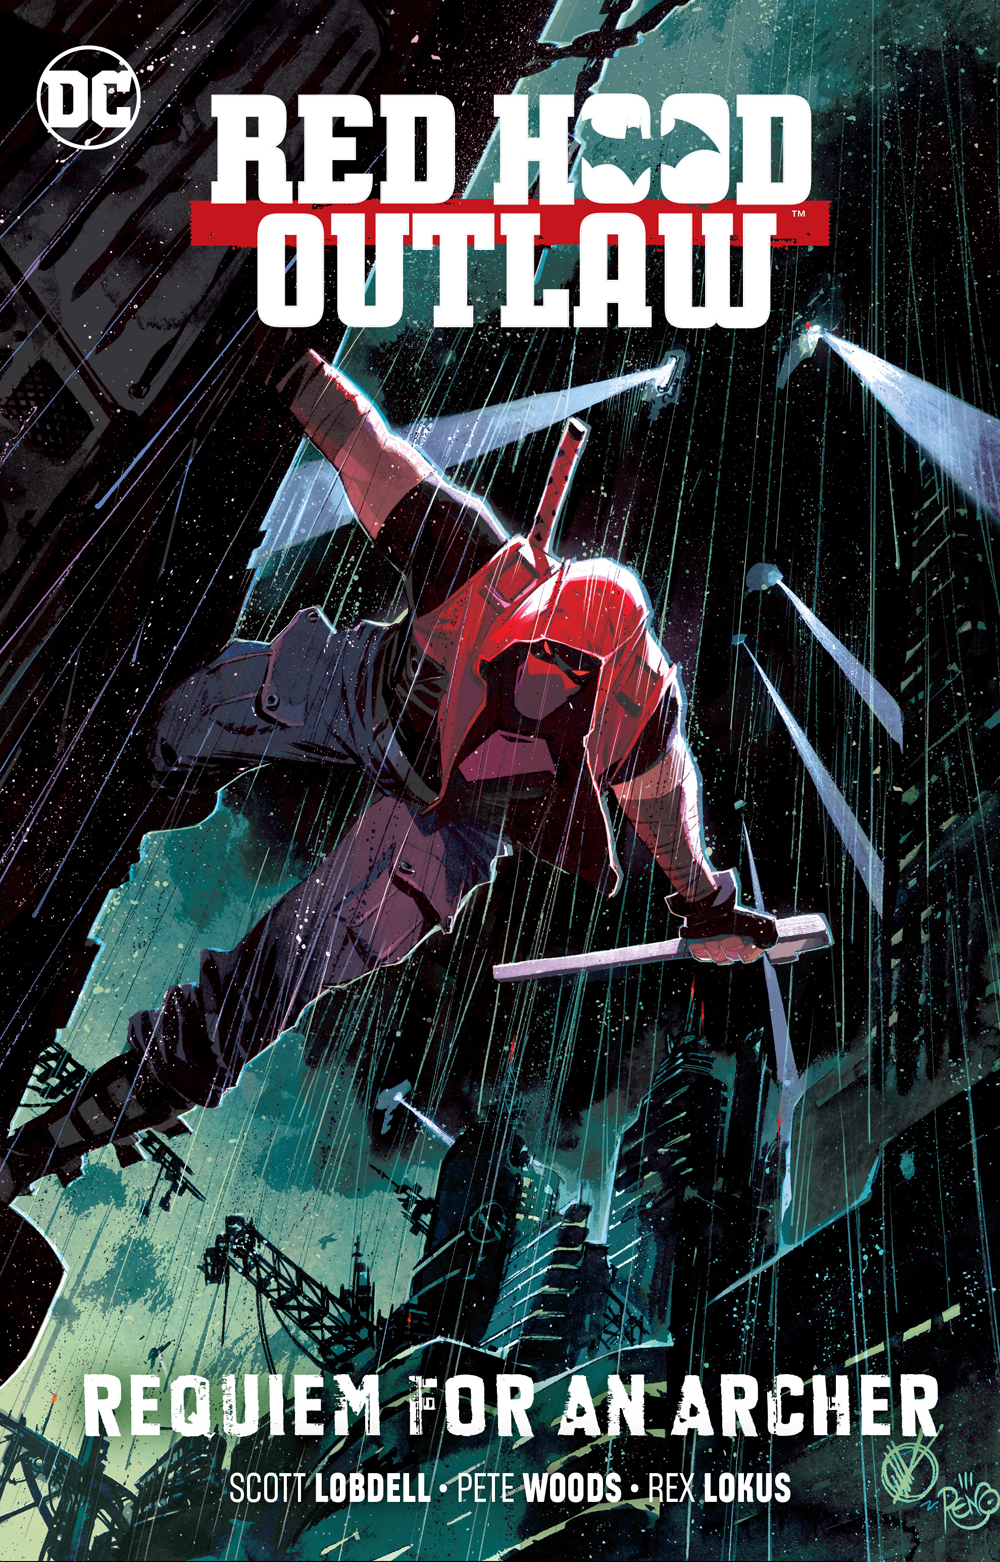 Red Hood Outlaw Graphic Novel Volume 1 Requiem for an Archer